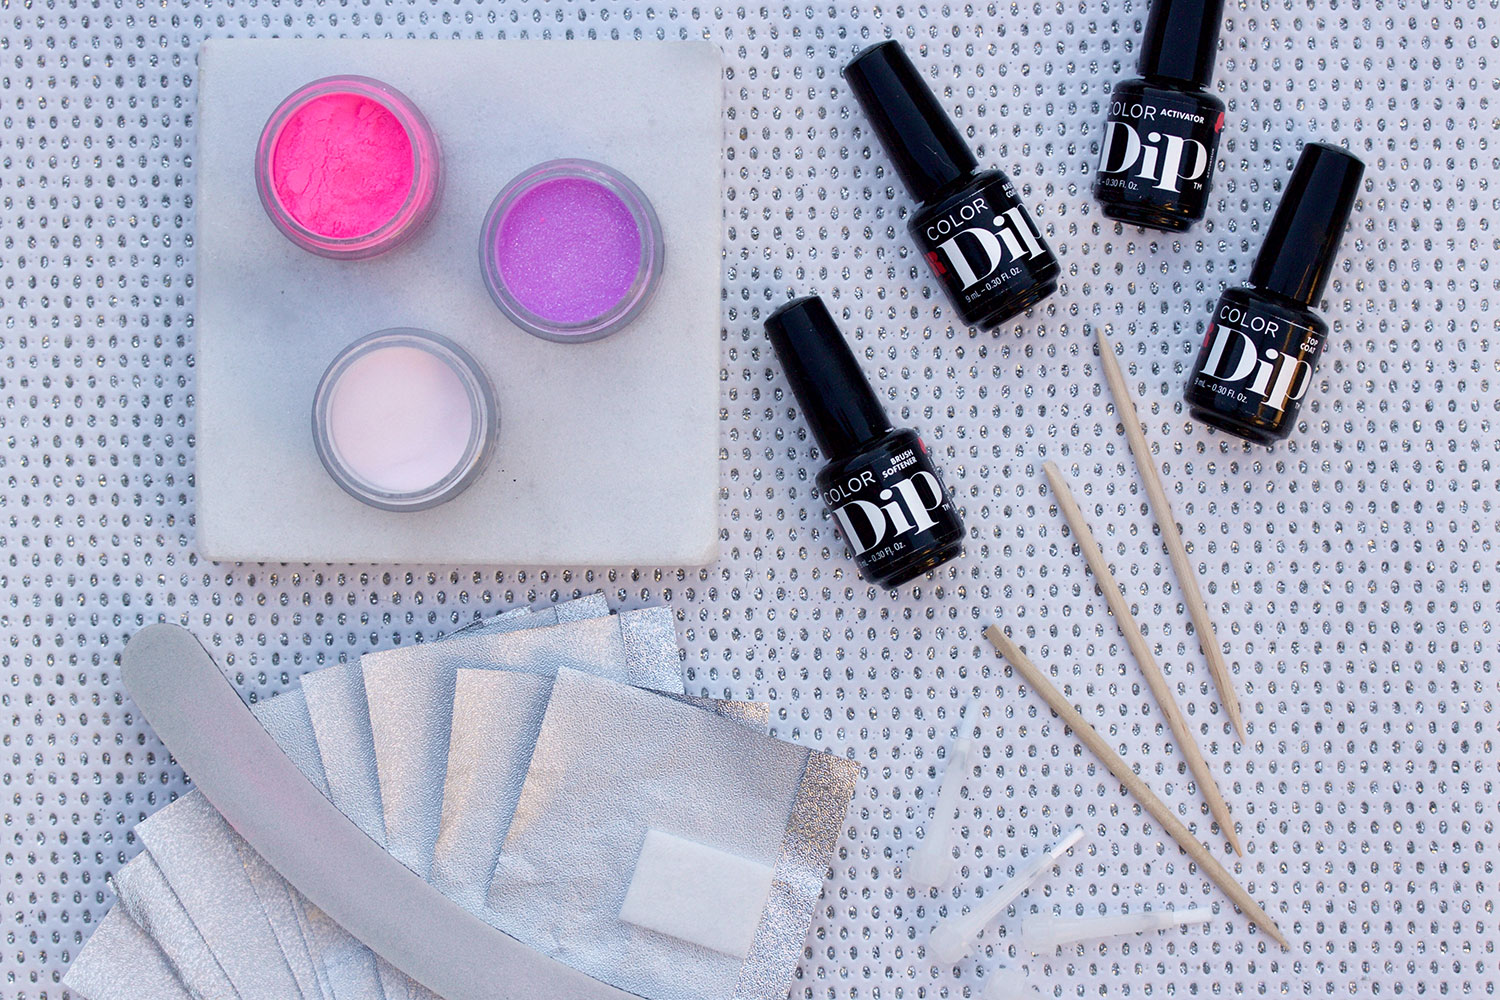 Red Carpet Manicure Color Dip Nail Dip Powder Review - The Daily Nail